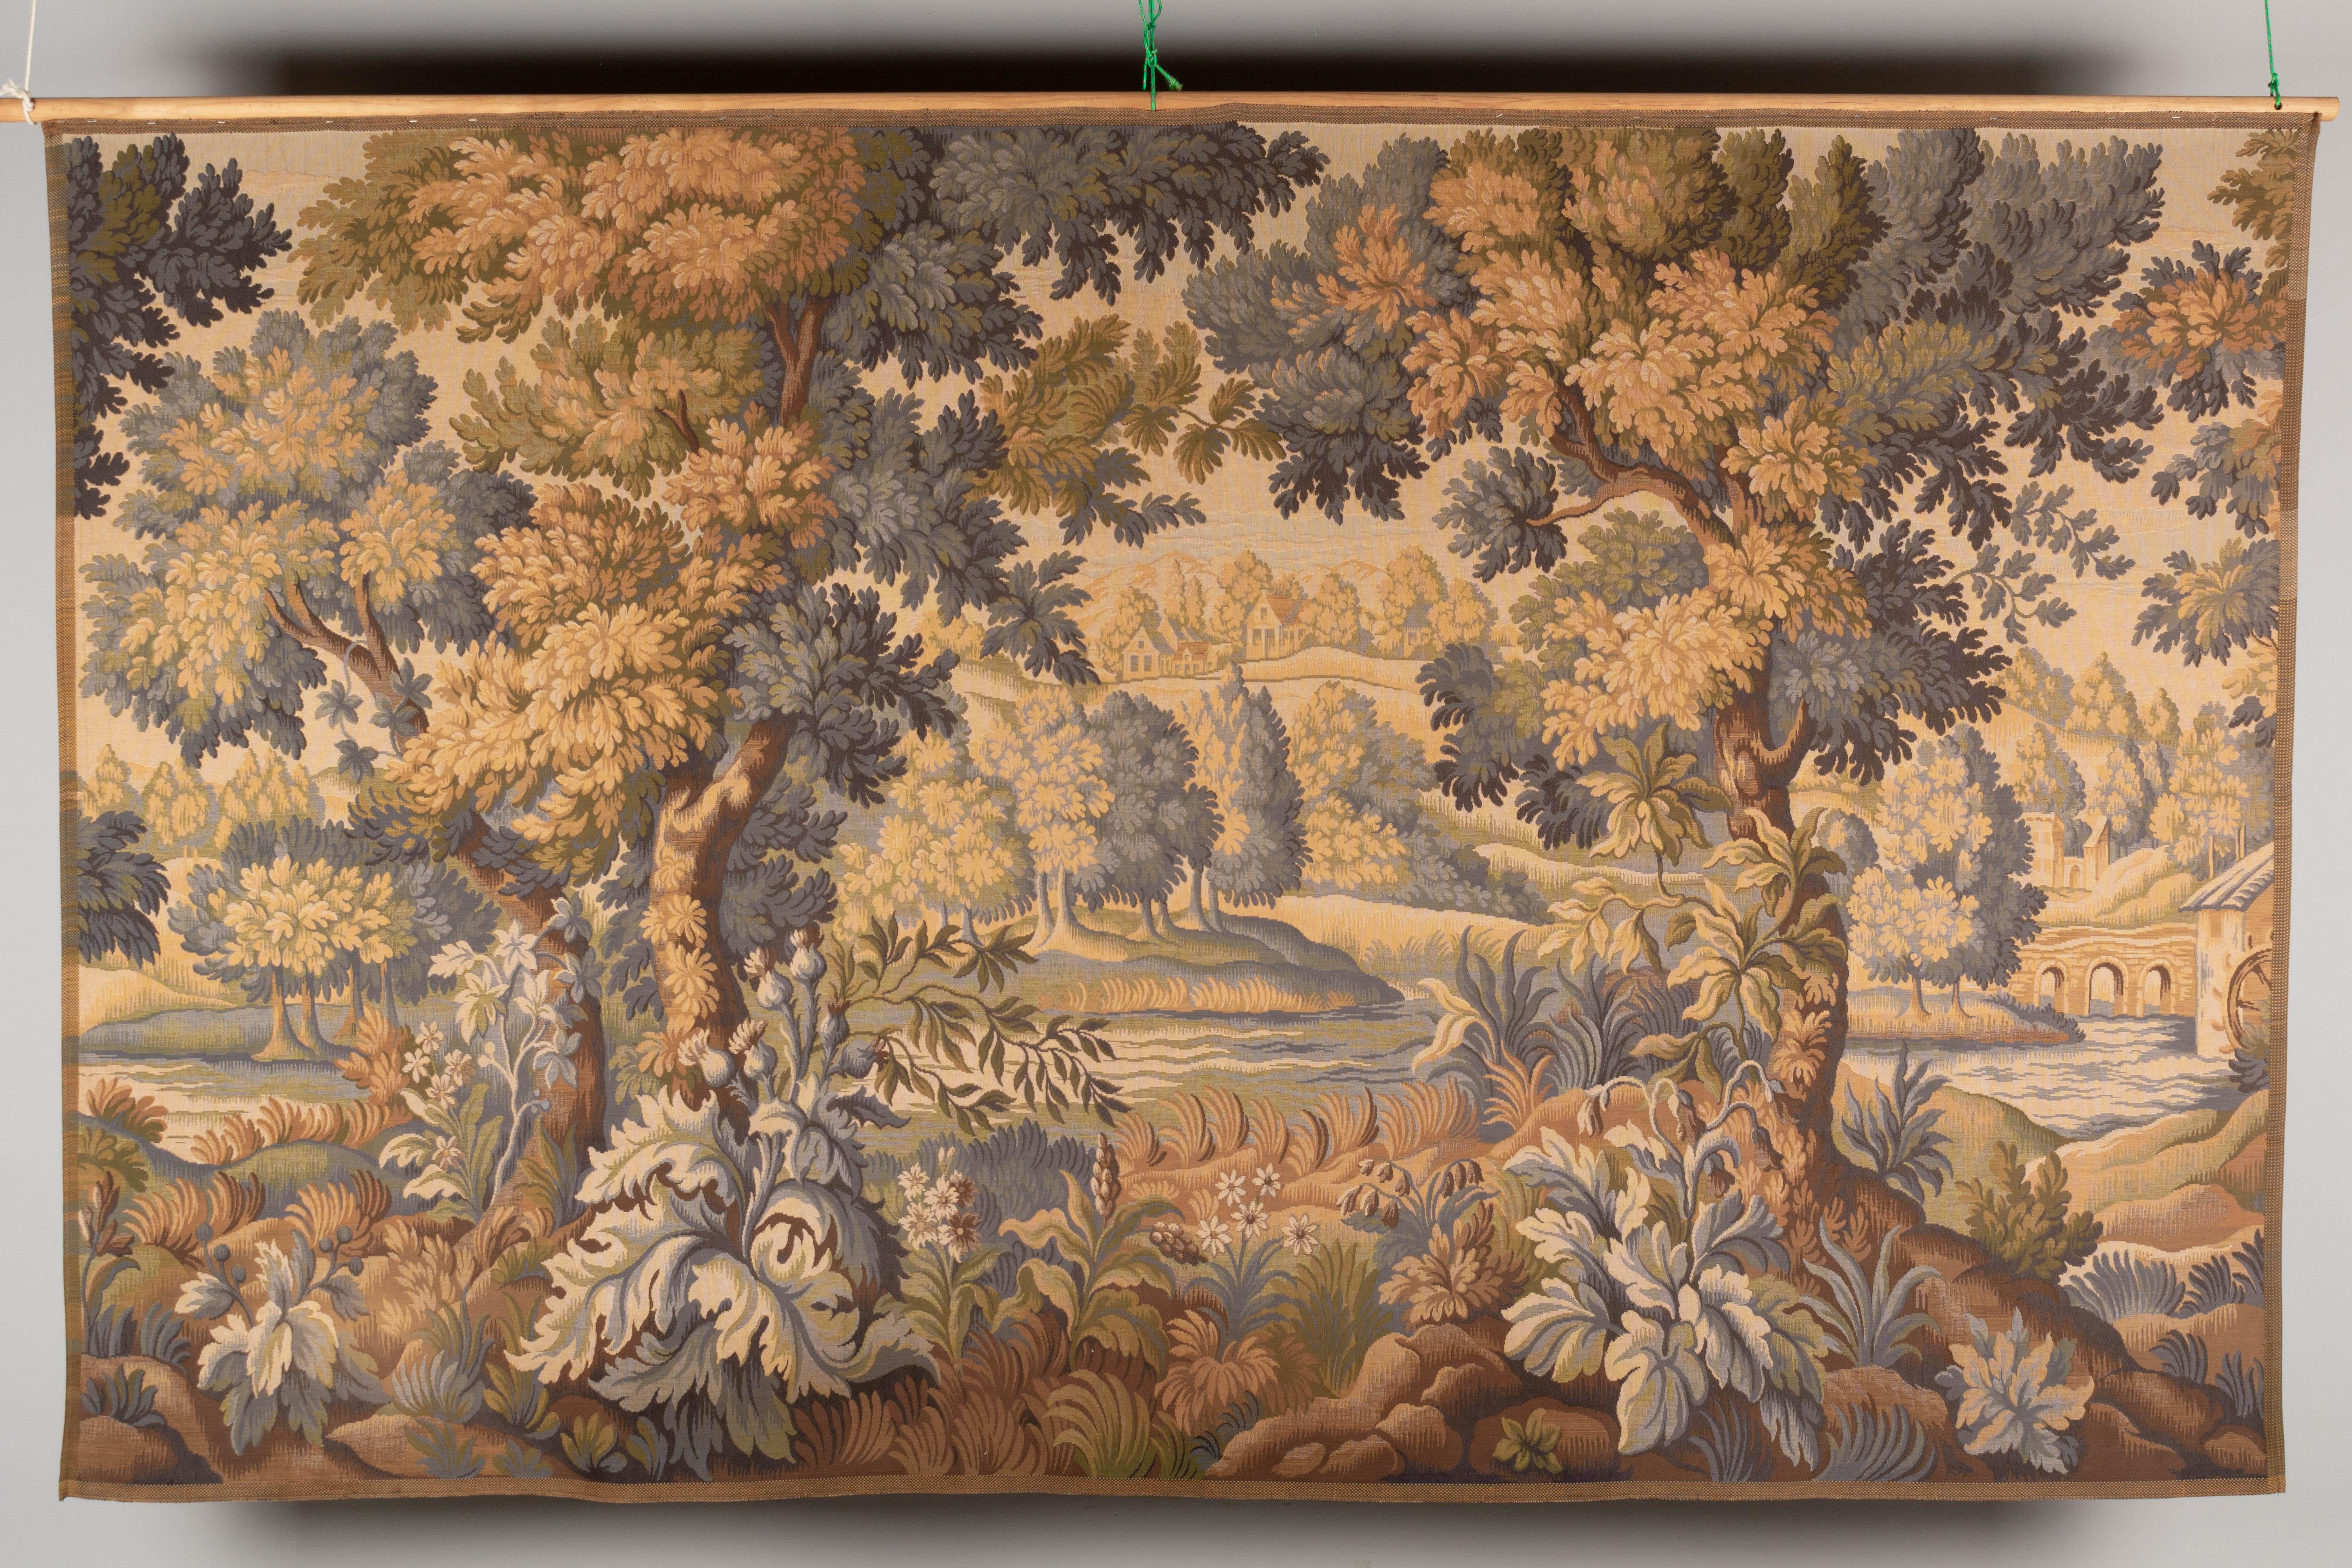 A large French Aubusson verdure wool tapestry, or wall hanging. Mechanical woven wool with the look of petit point in beautiful subtle muted blue, green and gold coloring. Very good condition. Label on back. Does not include hanging rod, will ship